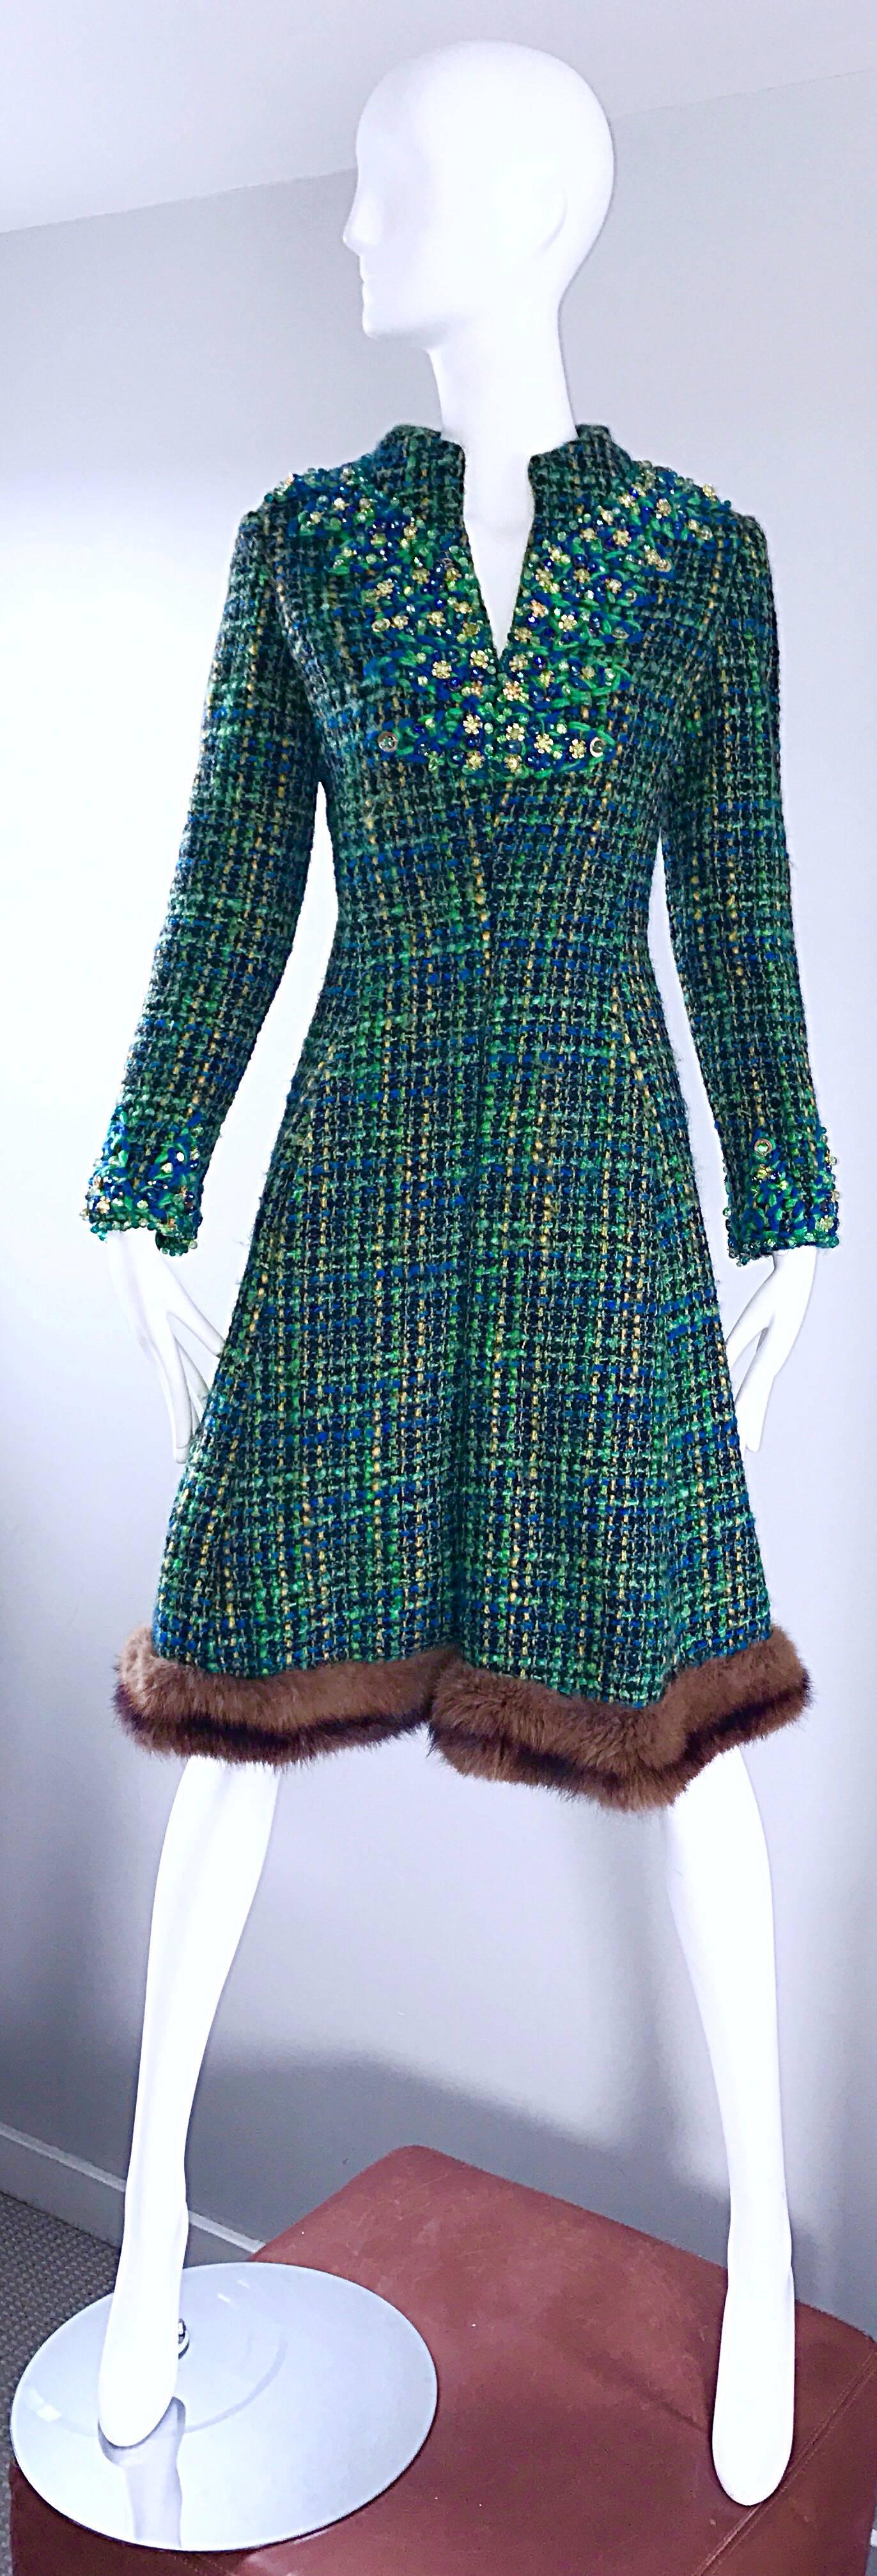 Super chic vintage 60s JULIUS GARFINCKEL green and blue boucle beaded long sleeve A-Line dress! Soft boucle in vibrant blue and green. Hand-sewn beads and sequins throughout the bodice and sleeves. Flattering A-Line fit, and sleek tailored long